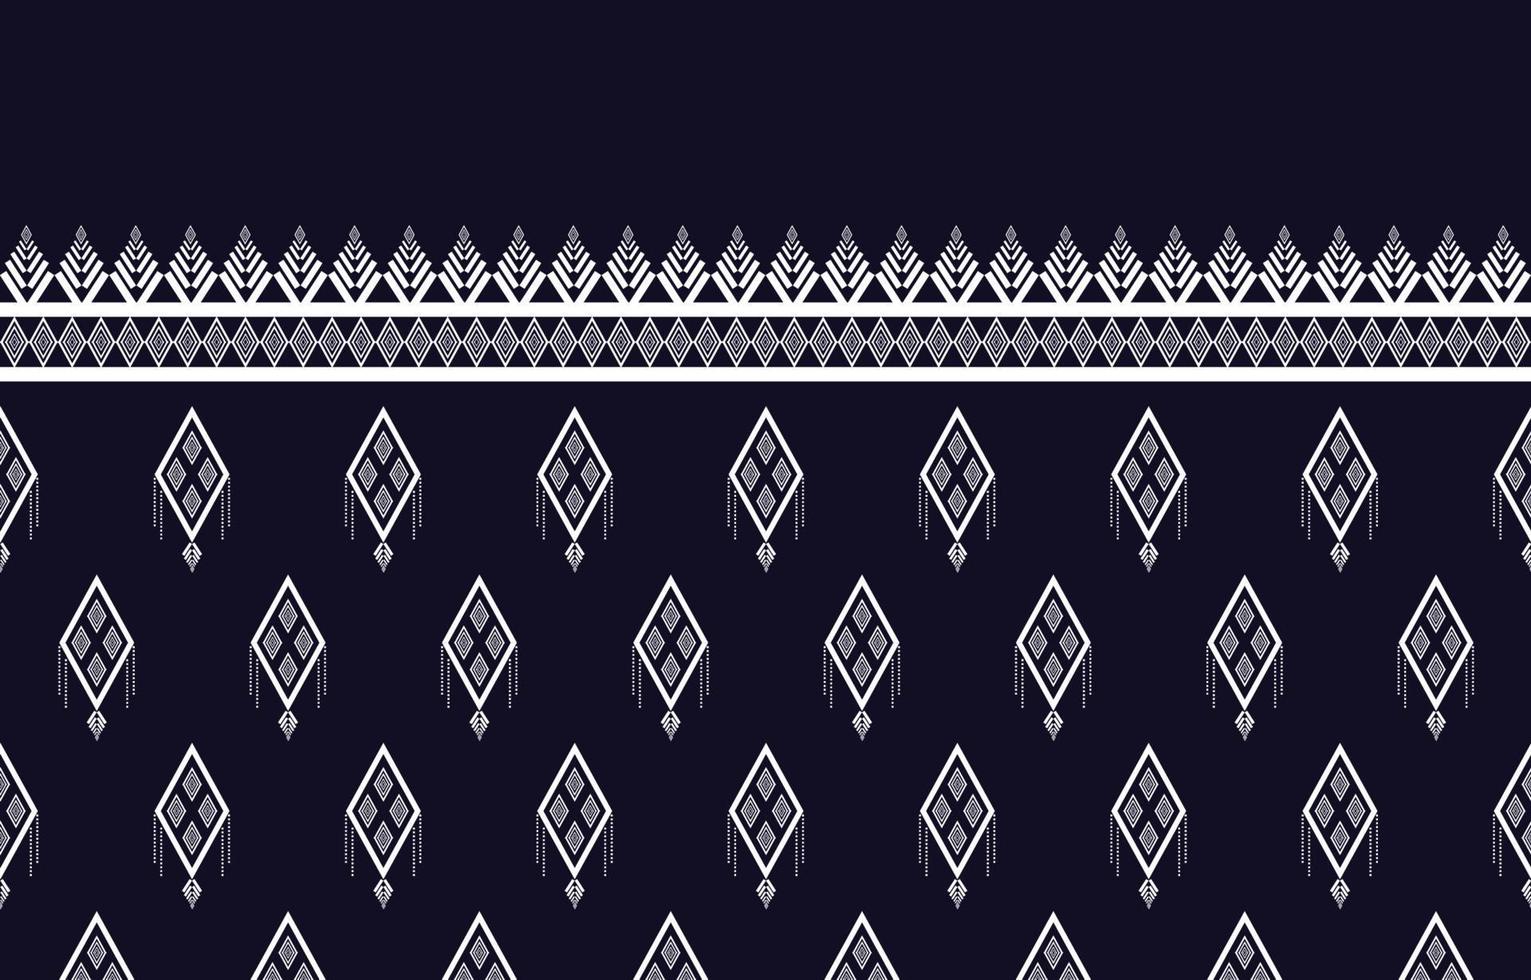 Geometric ethnic patterns tribal traditional indigenous. Embroidery style design for background, wallpaper, carpet, fabric, wrap, batik, vector illustration